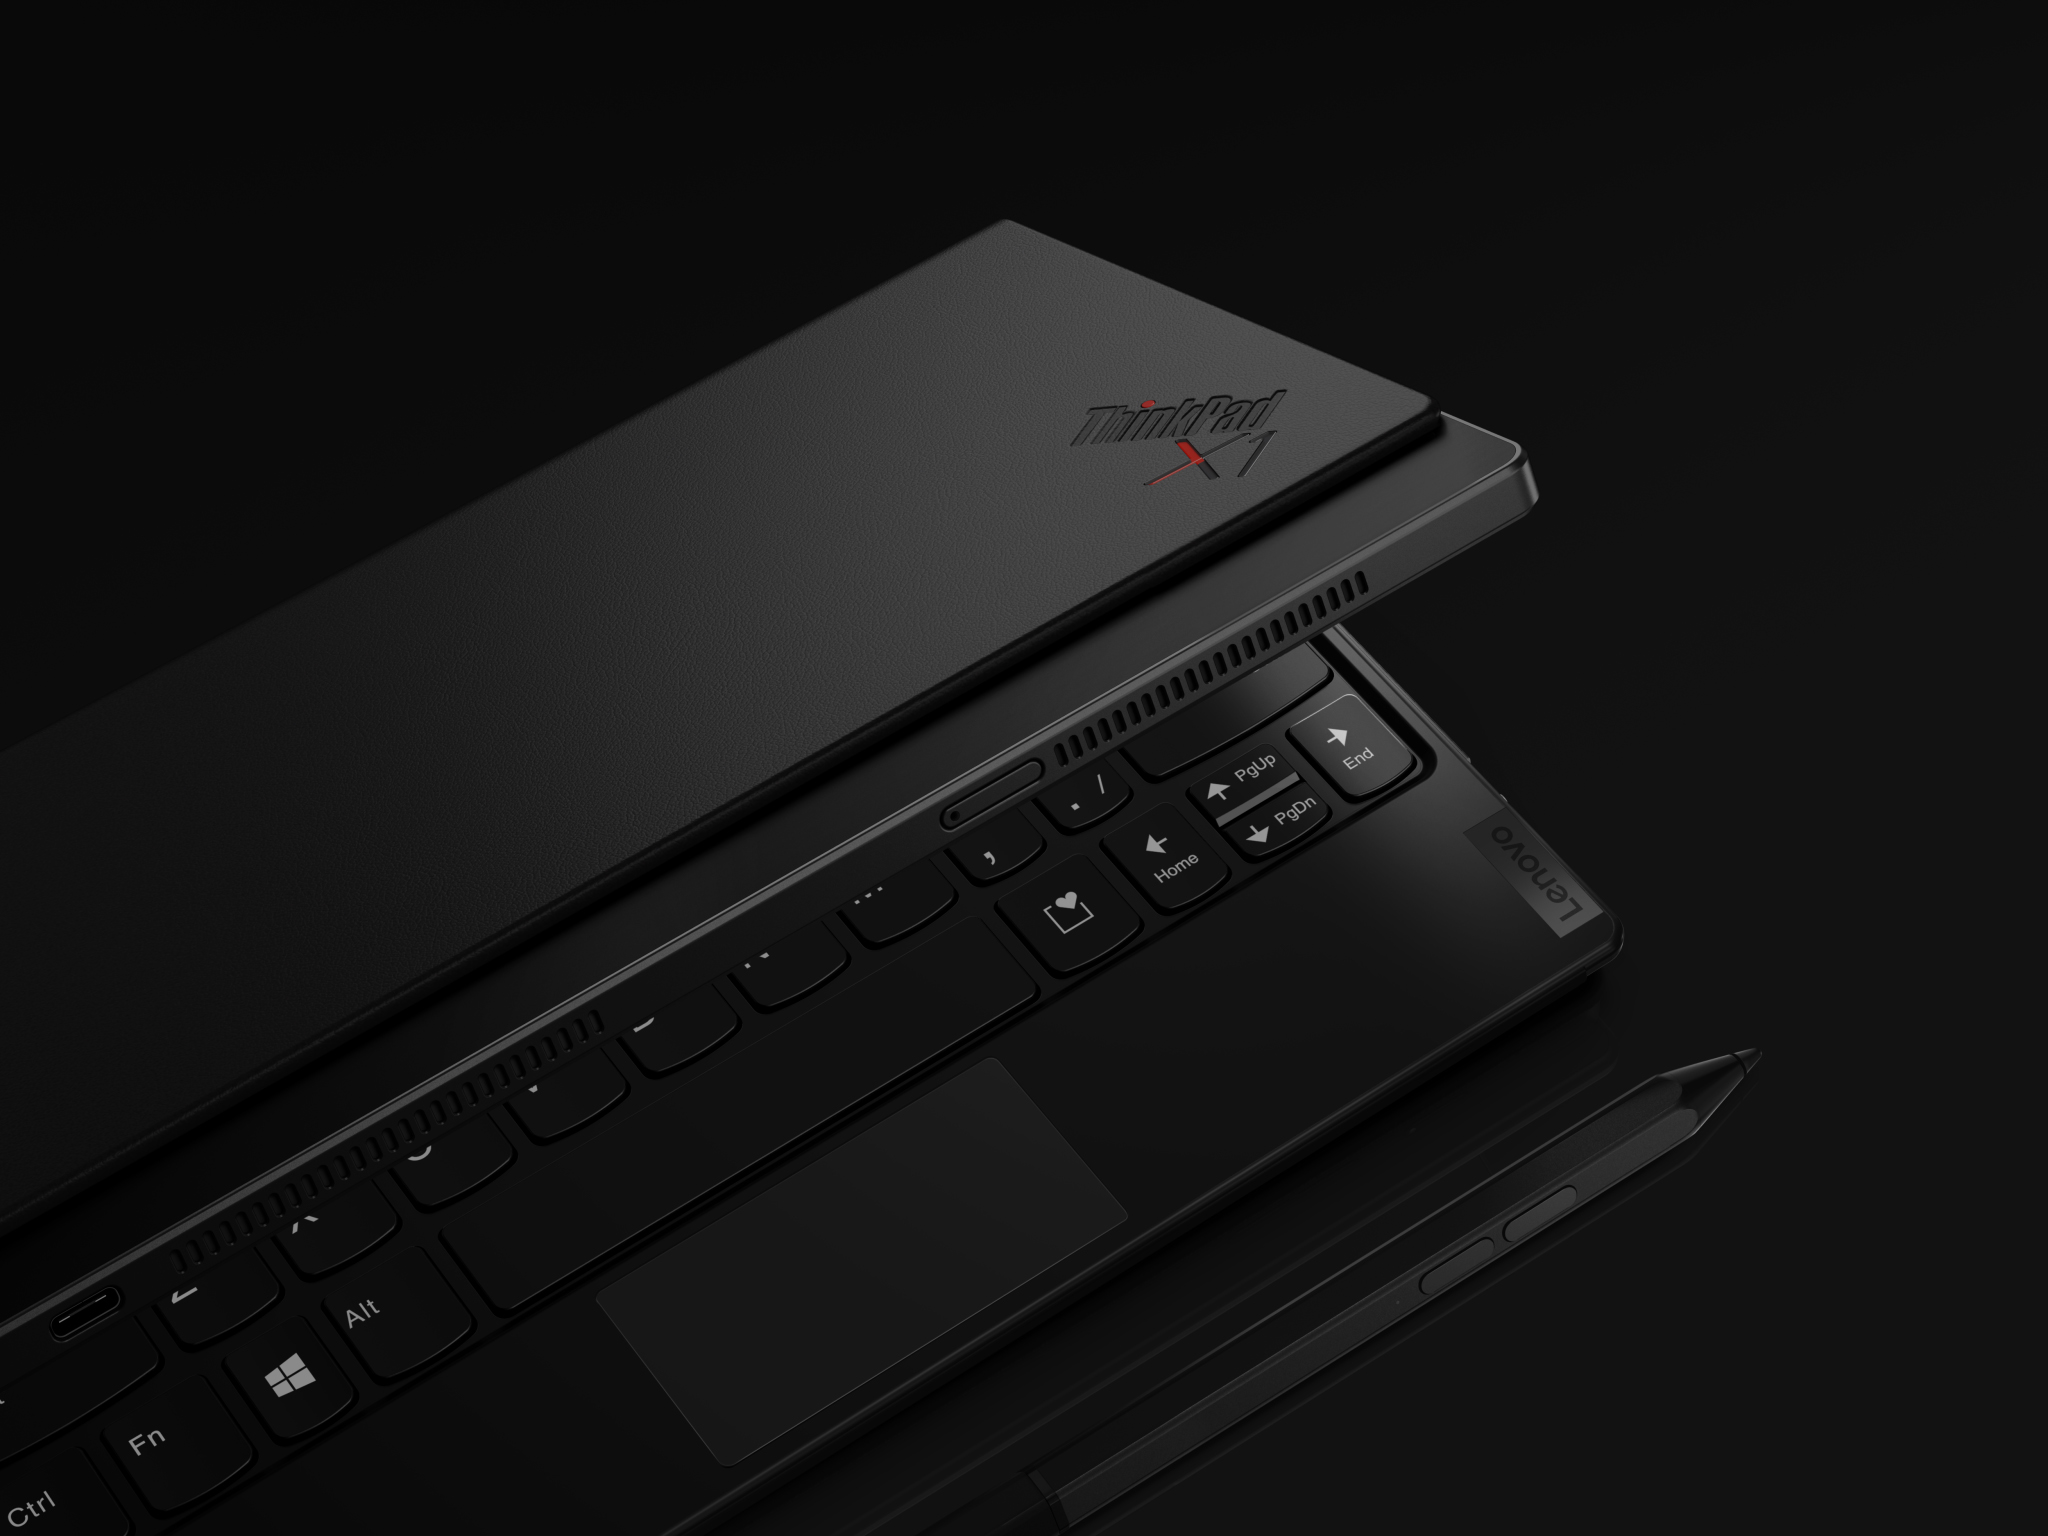 Industrial-design-for-Lenovo-products